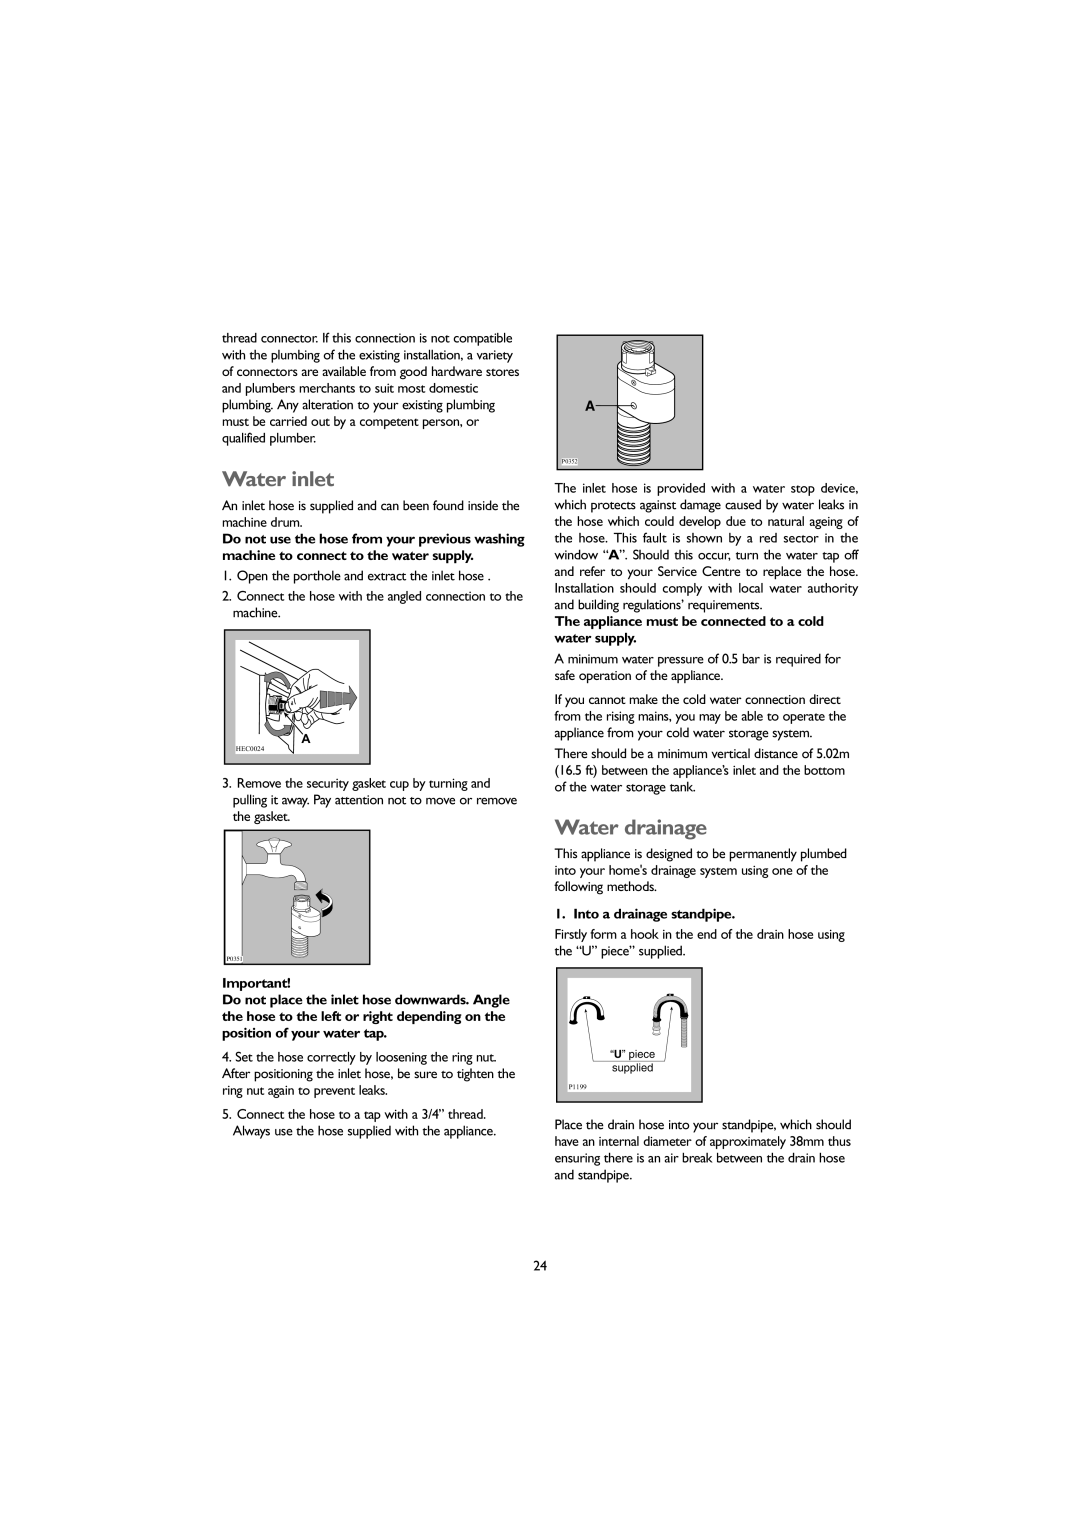 John Lewis JLWM 1406 instruction manual Water inlet, Water drainage, The appliance must be connected to a cold water supply 